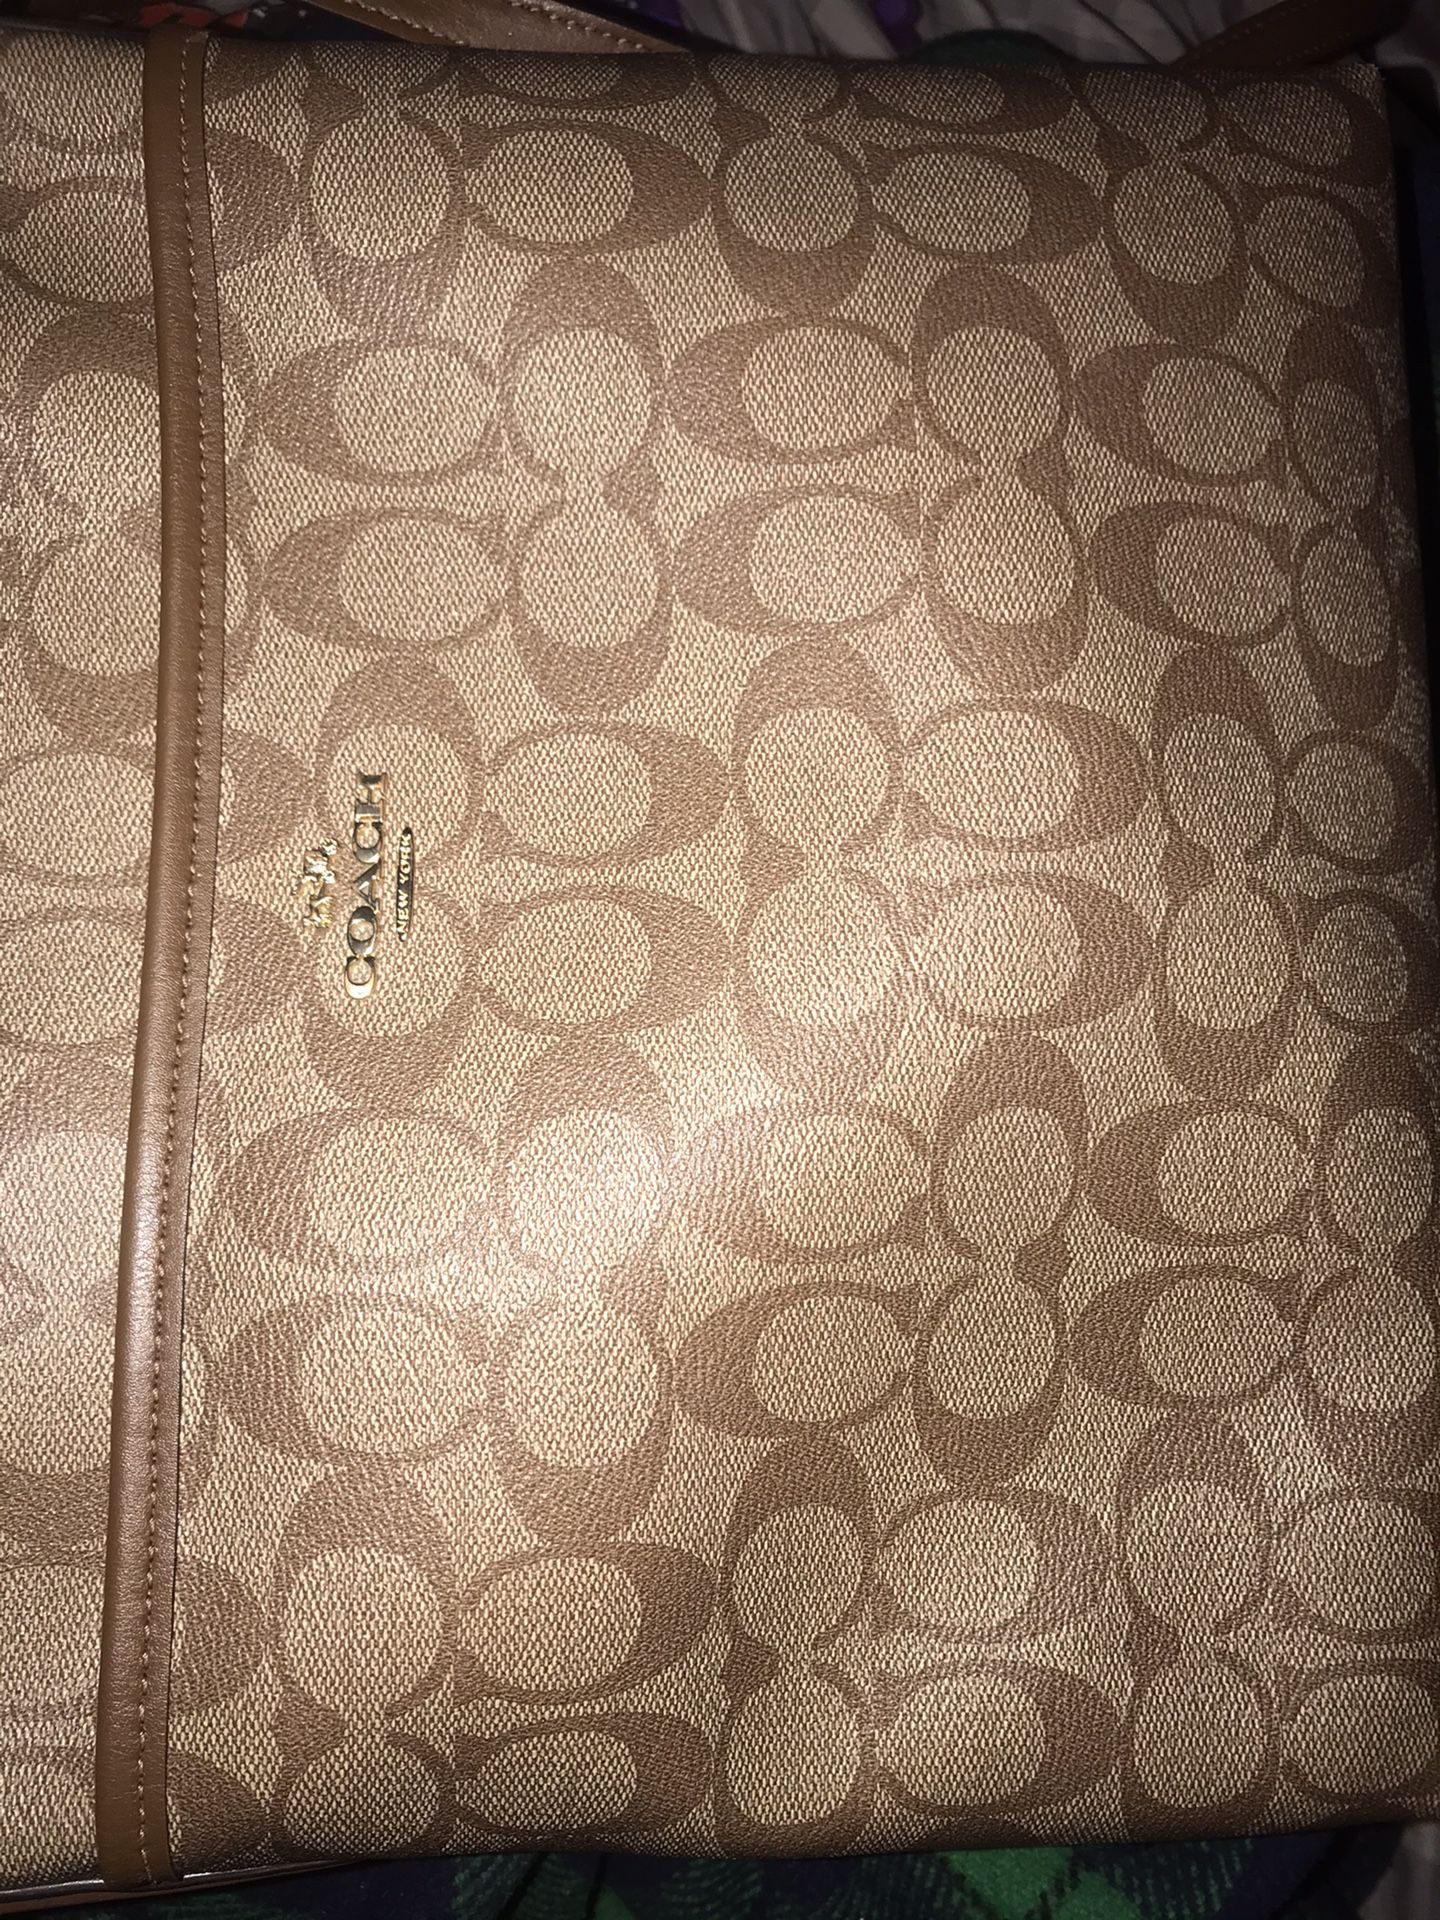 Coach bag and small coach wallet